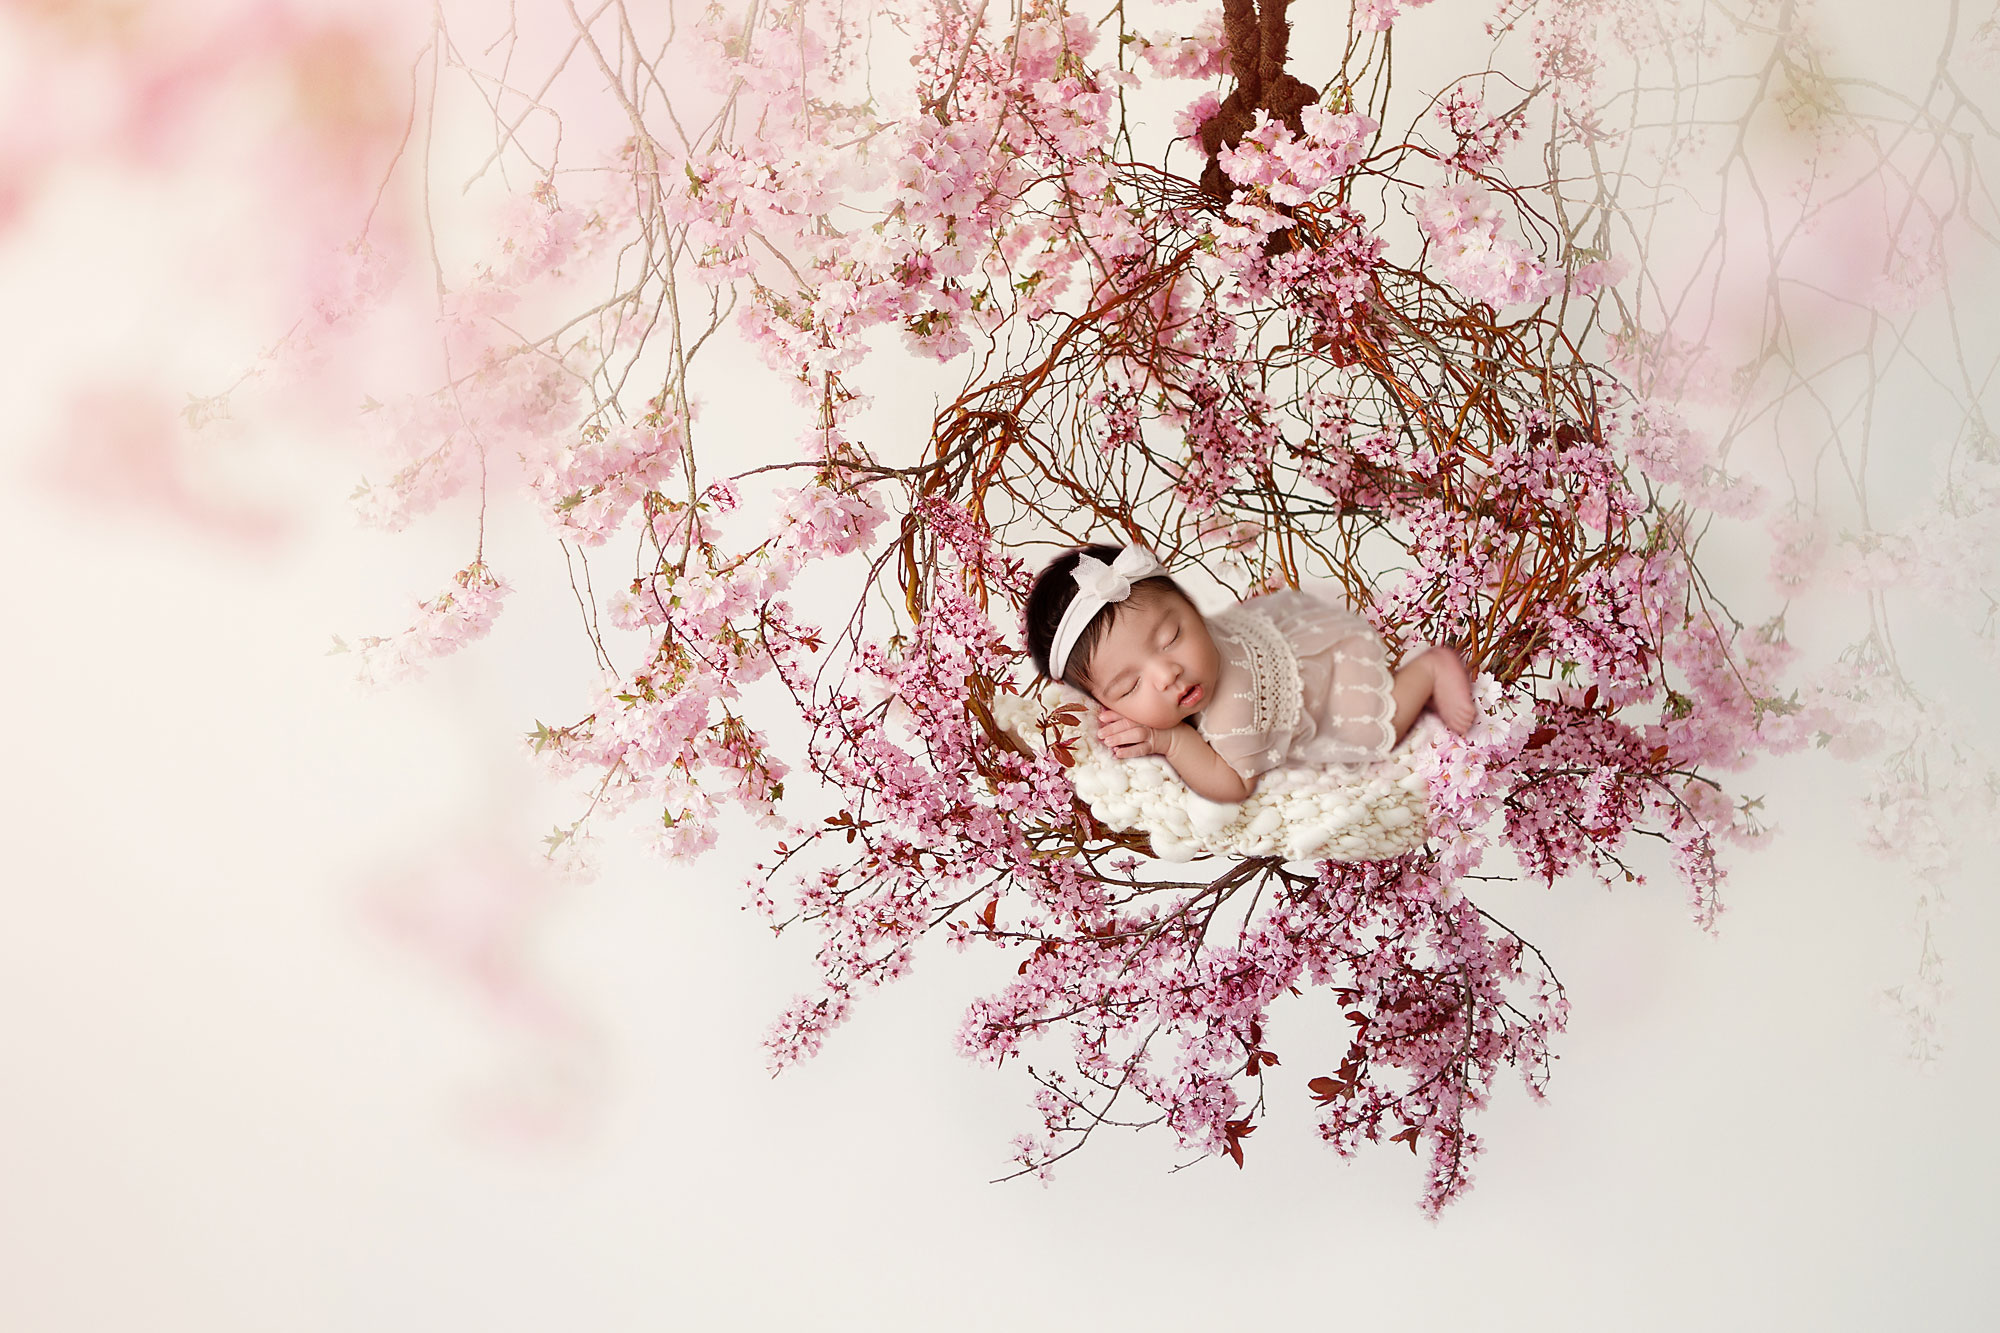 newborn composite images, infant in white asleep on cherry blossom wreath